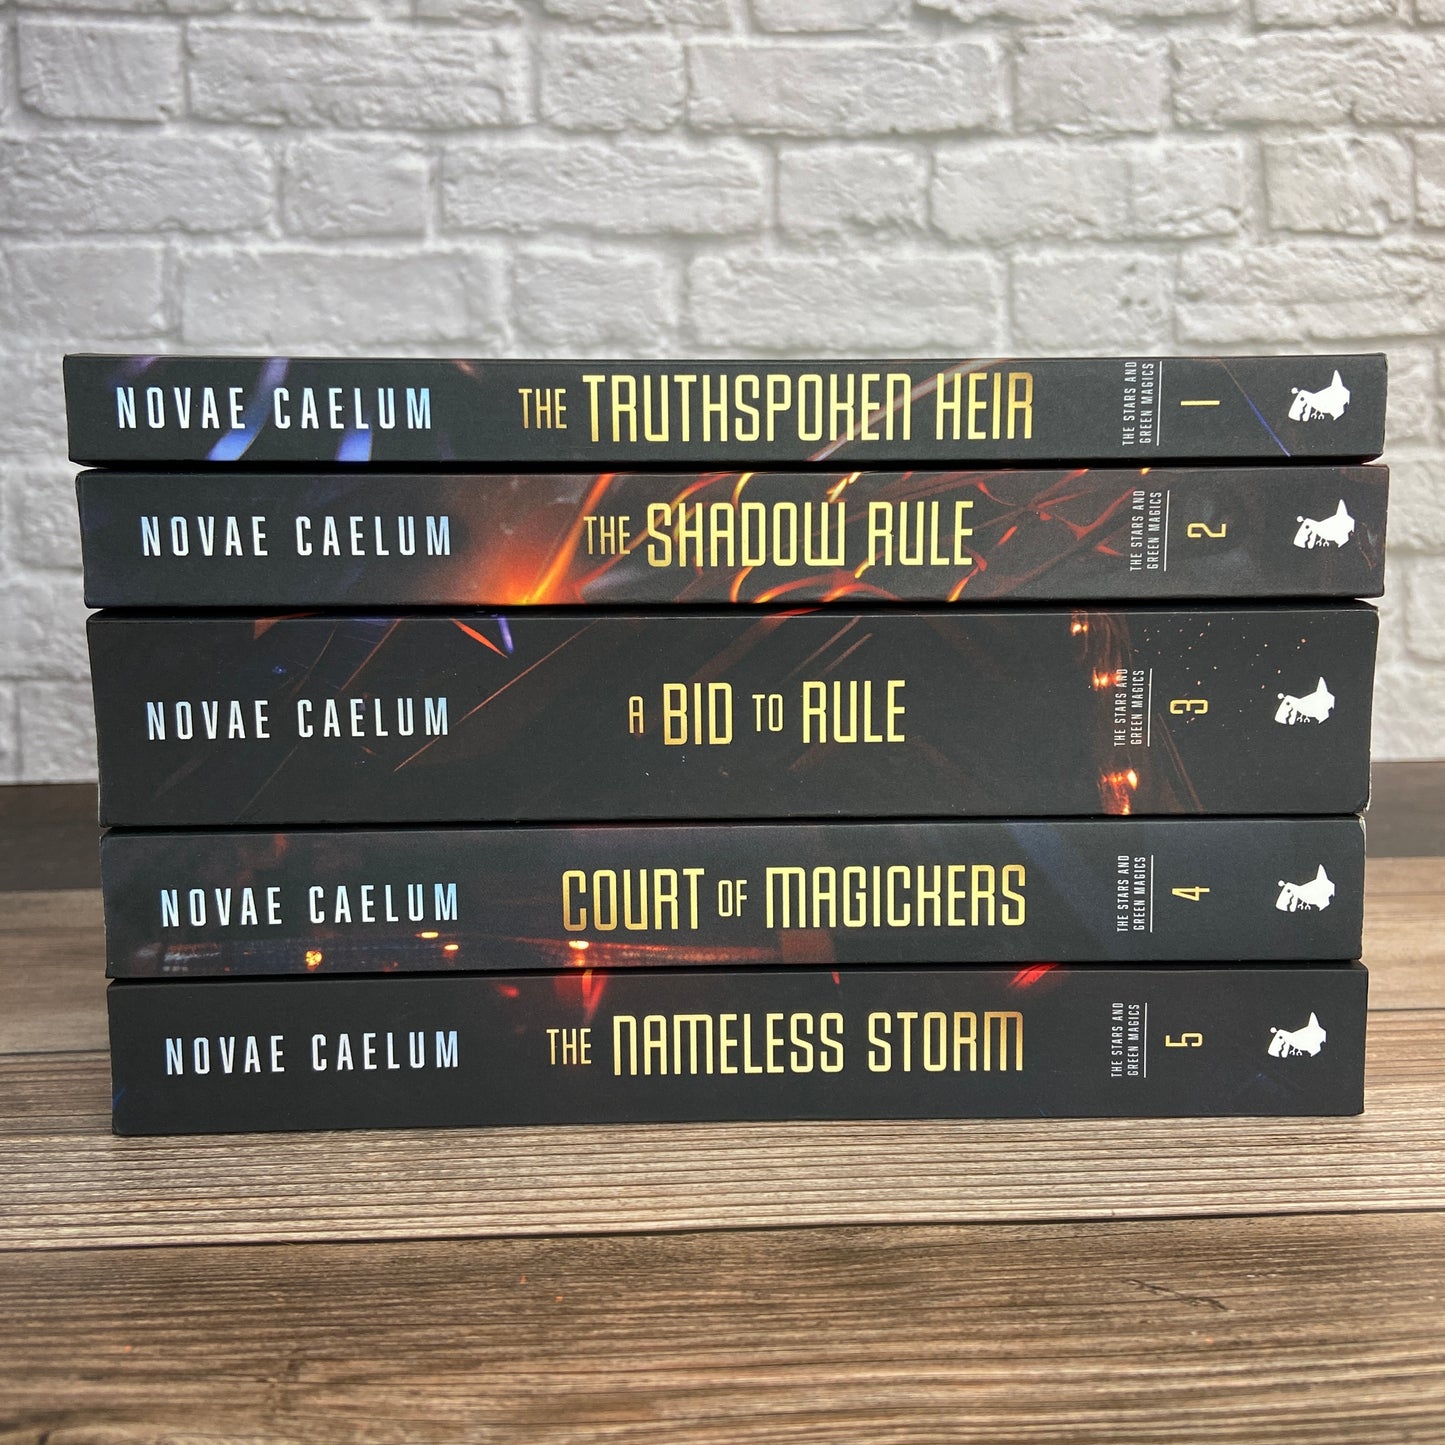 Stack of 5 paperbacks (Books 1-5) from "The Stars and Green Magics" series by Novae Caelum with spines displayed. This collection is part of the Paperback Deluxe Swag Bundle.